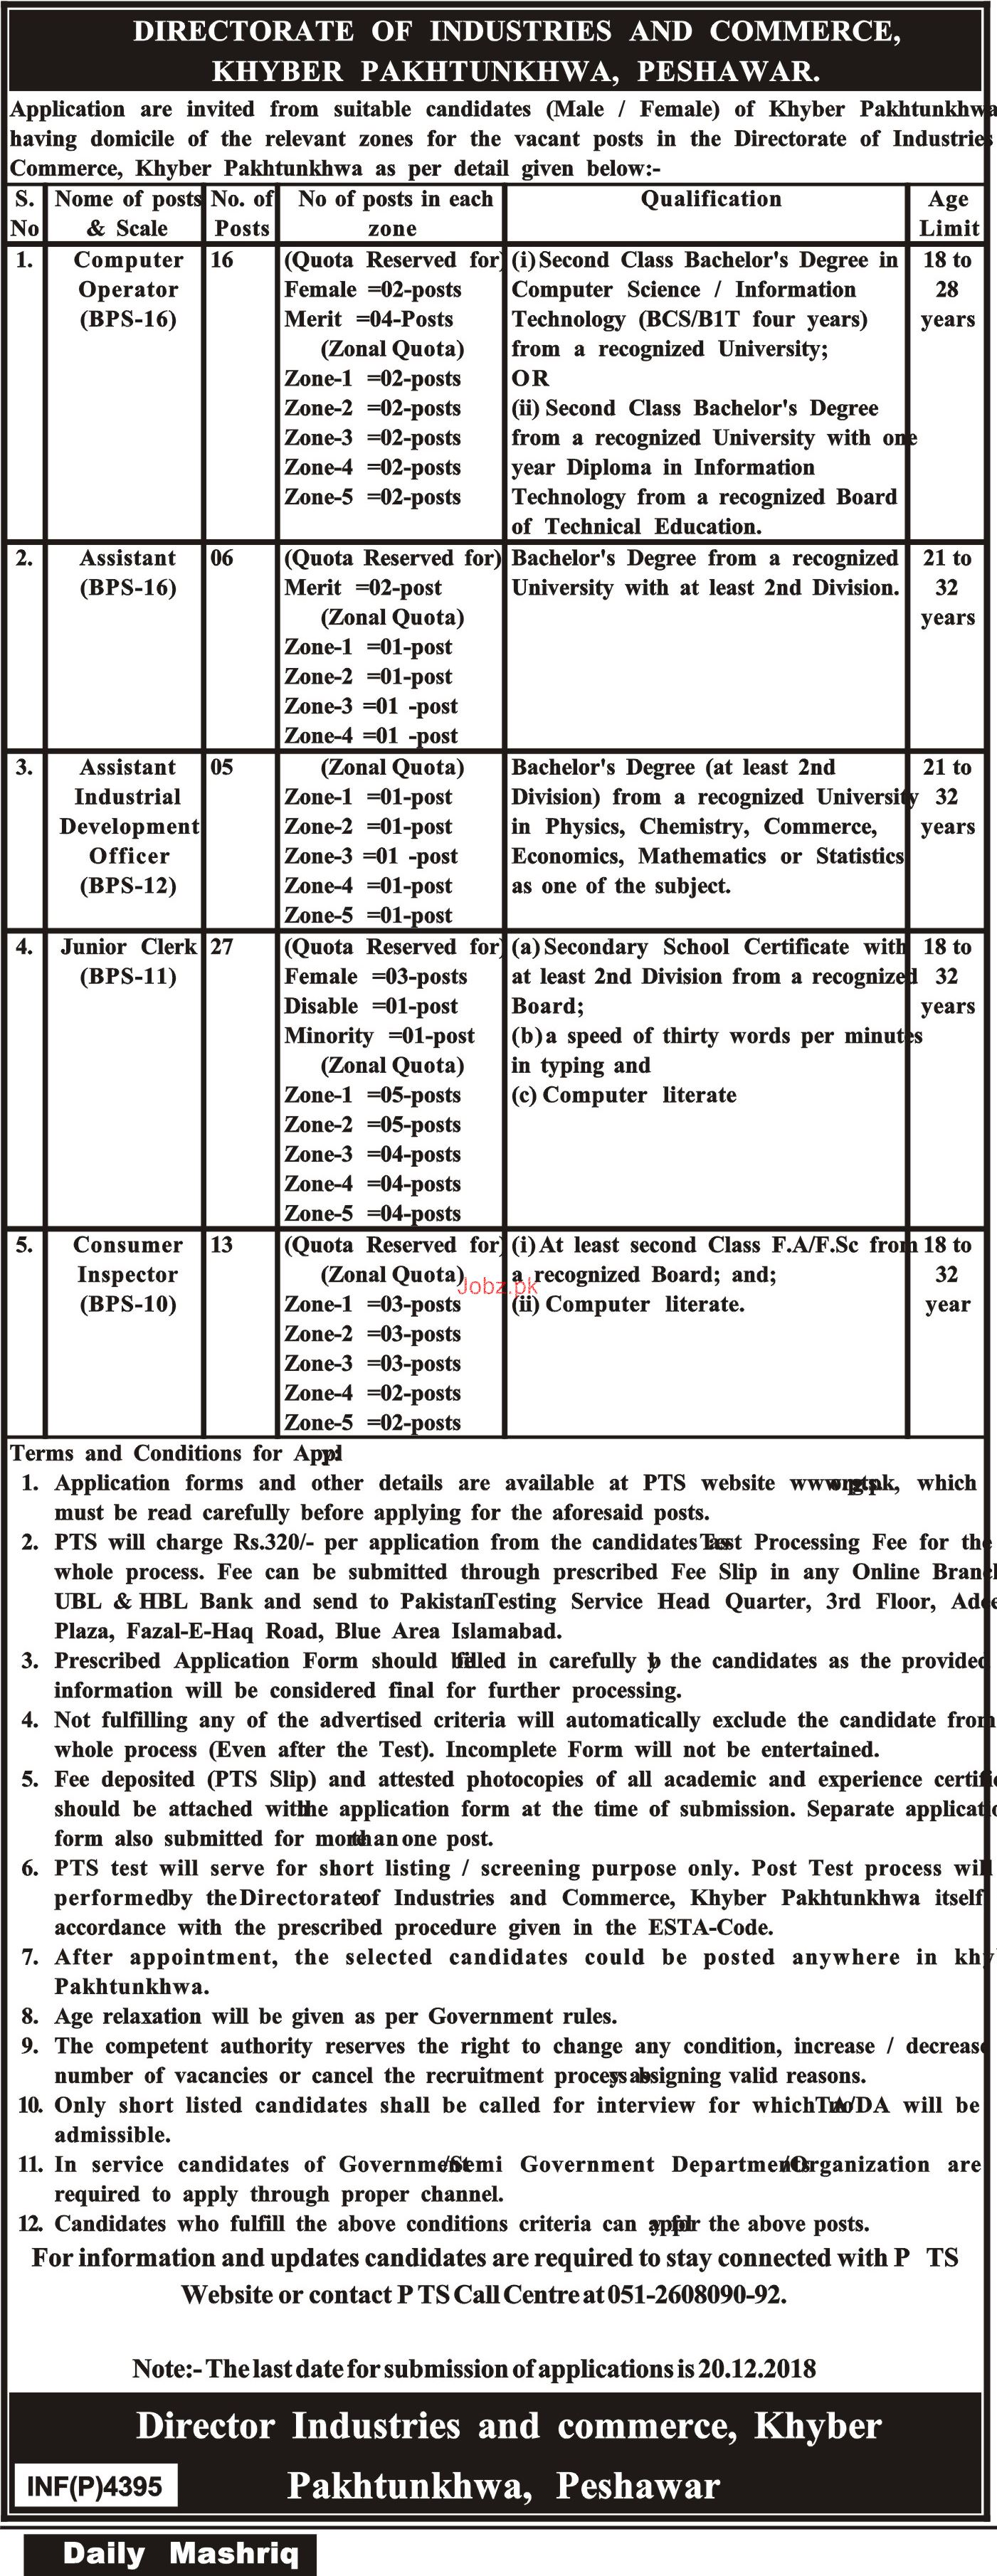 KPK Directorate of Industries and Commerce Jobs 2018